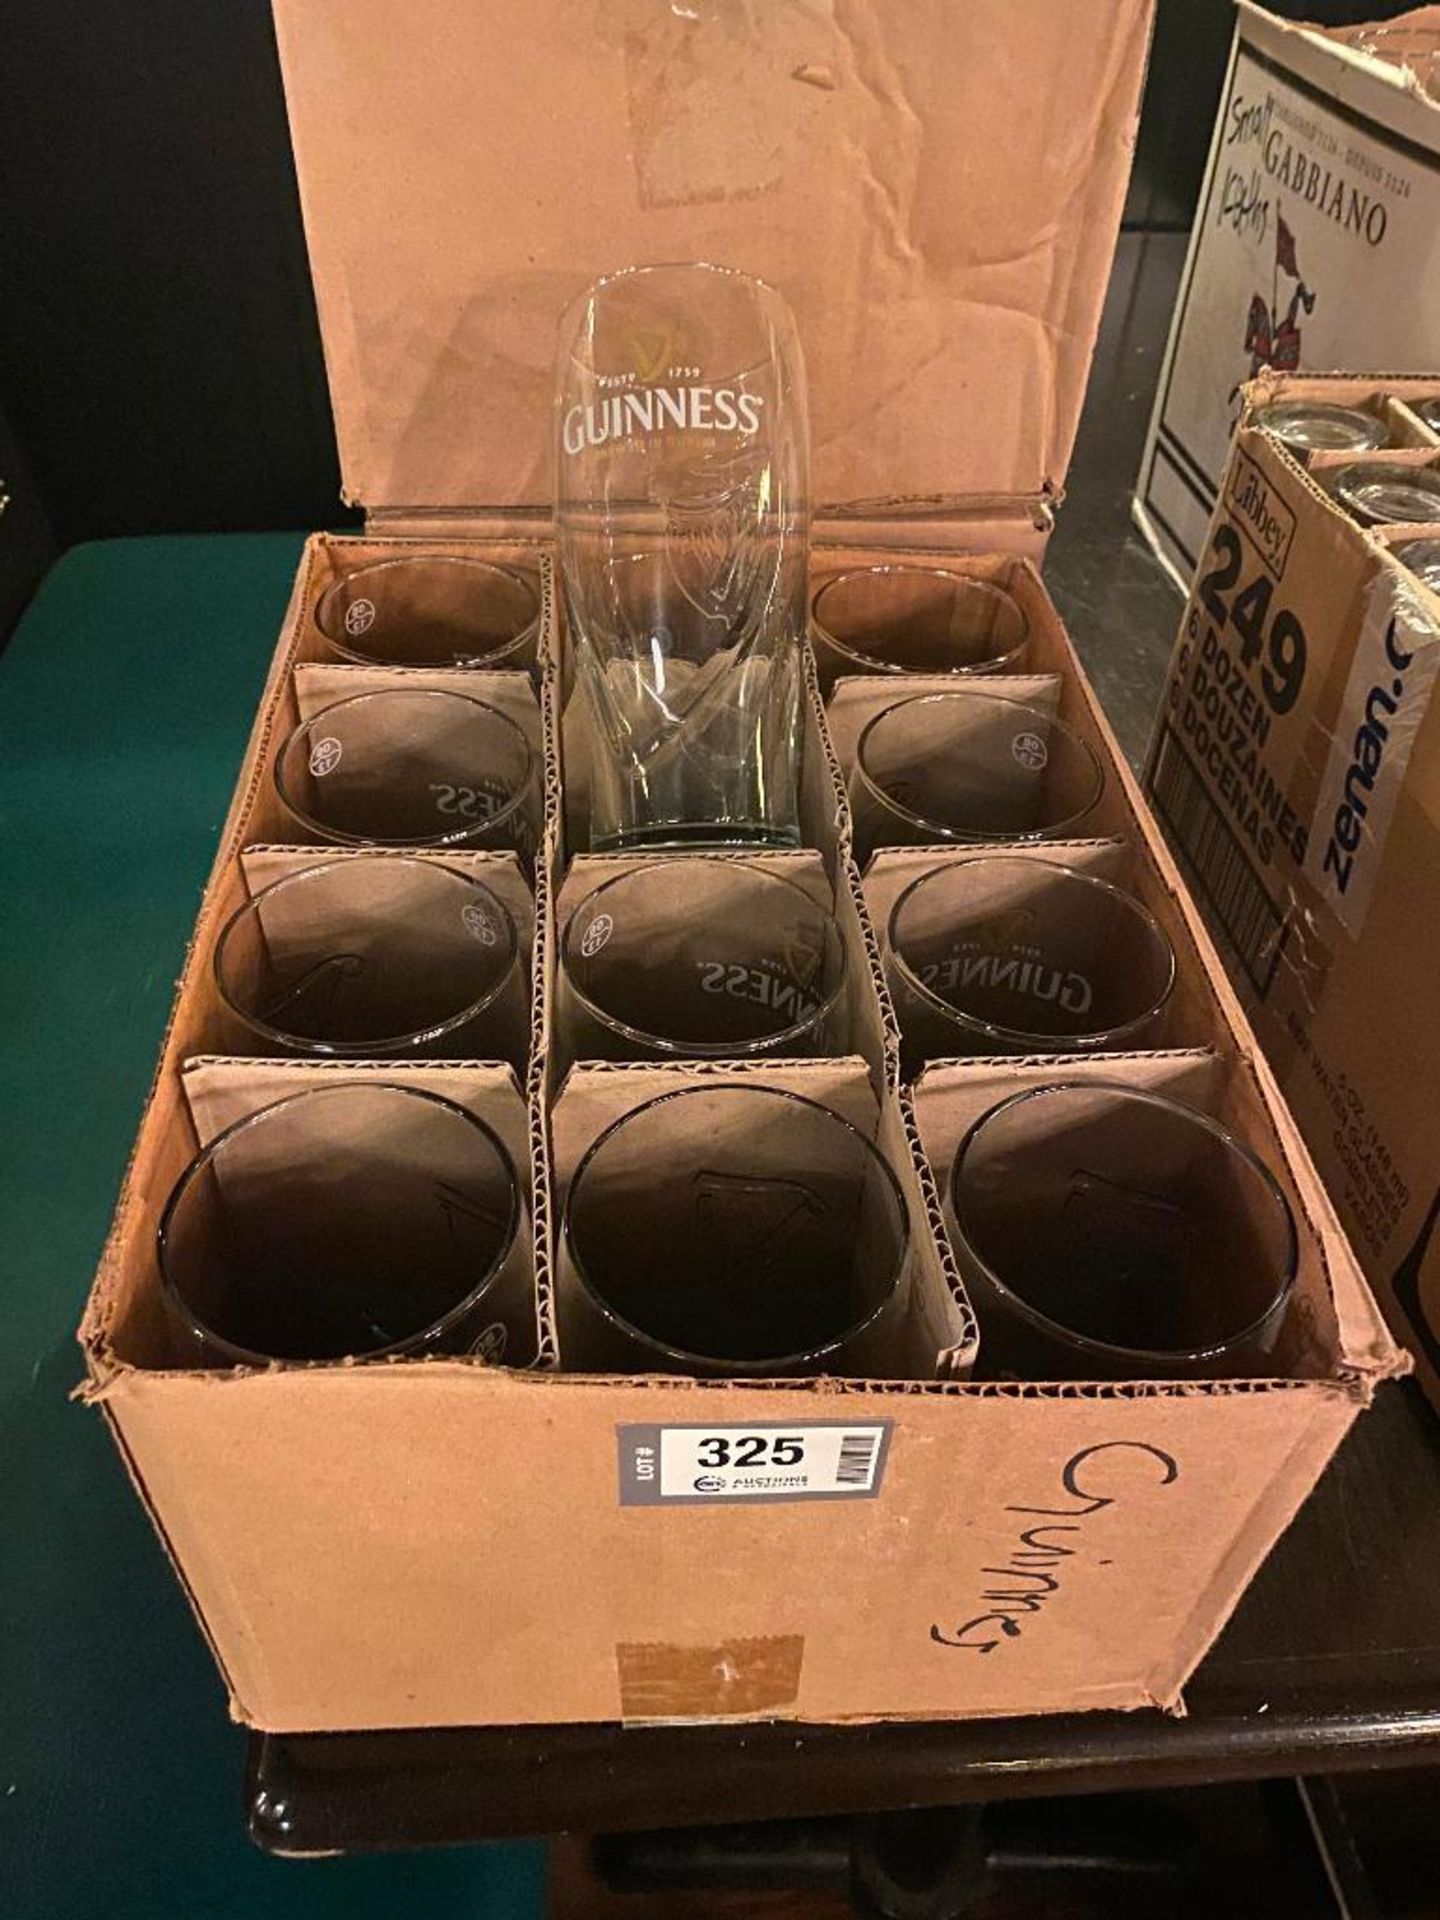 LOT OF (4) BOXES OF GUINNESS GLASSES - Image 2 of 3